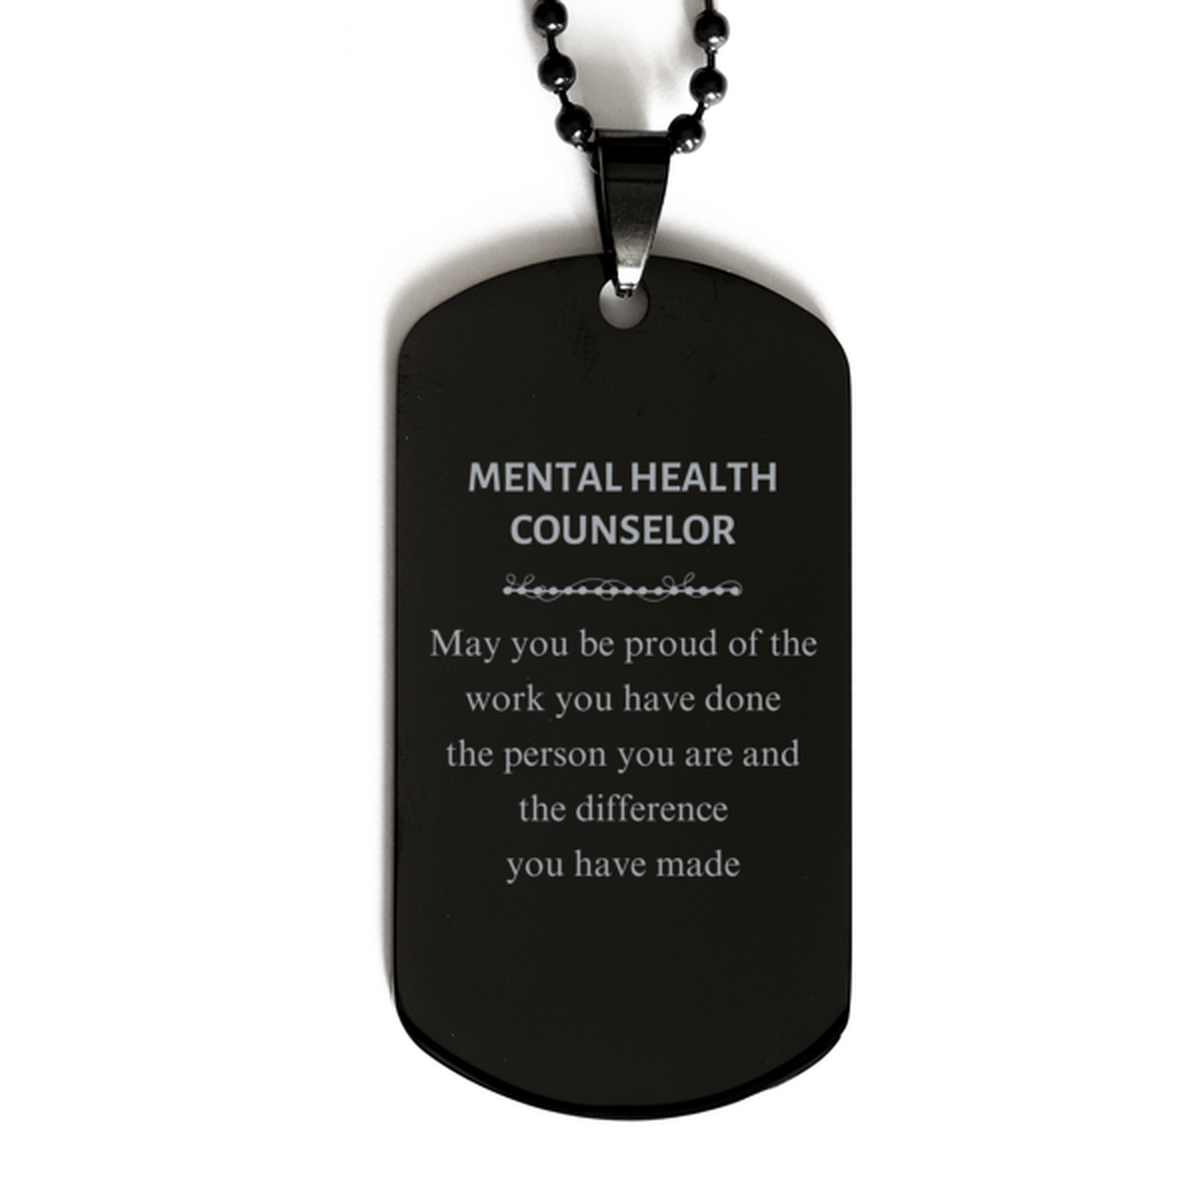 Mental Health Counselor May you be proud of the work you have done, Retirement Mental Health Counselor Black Dog Tag for Colleague Appreciation Gifts Amazing for Mental Health Counselor